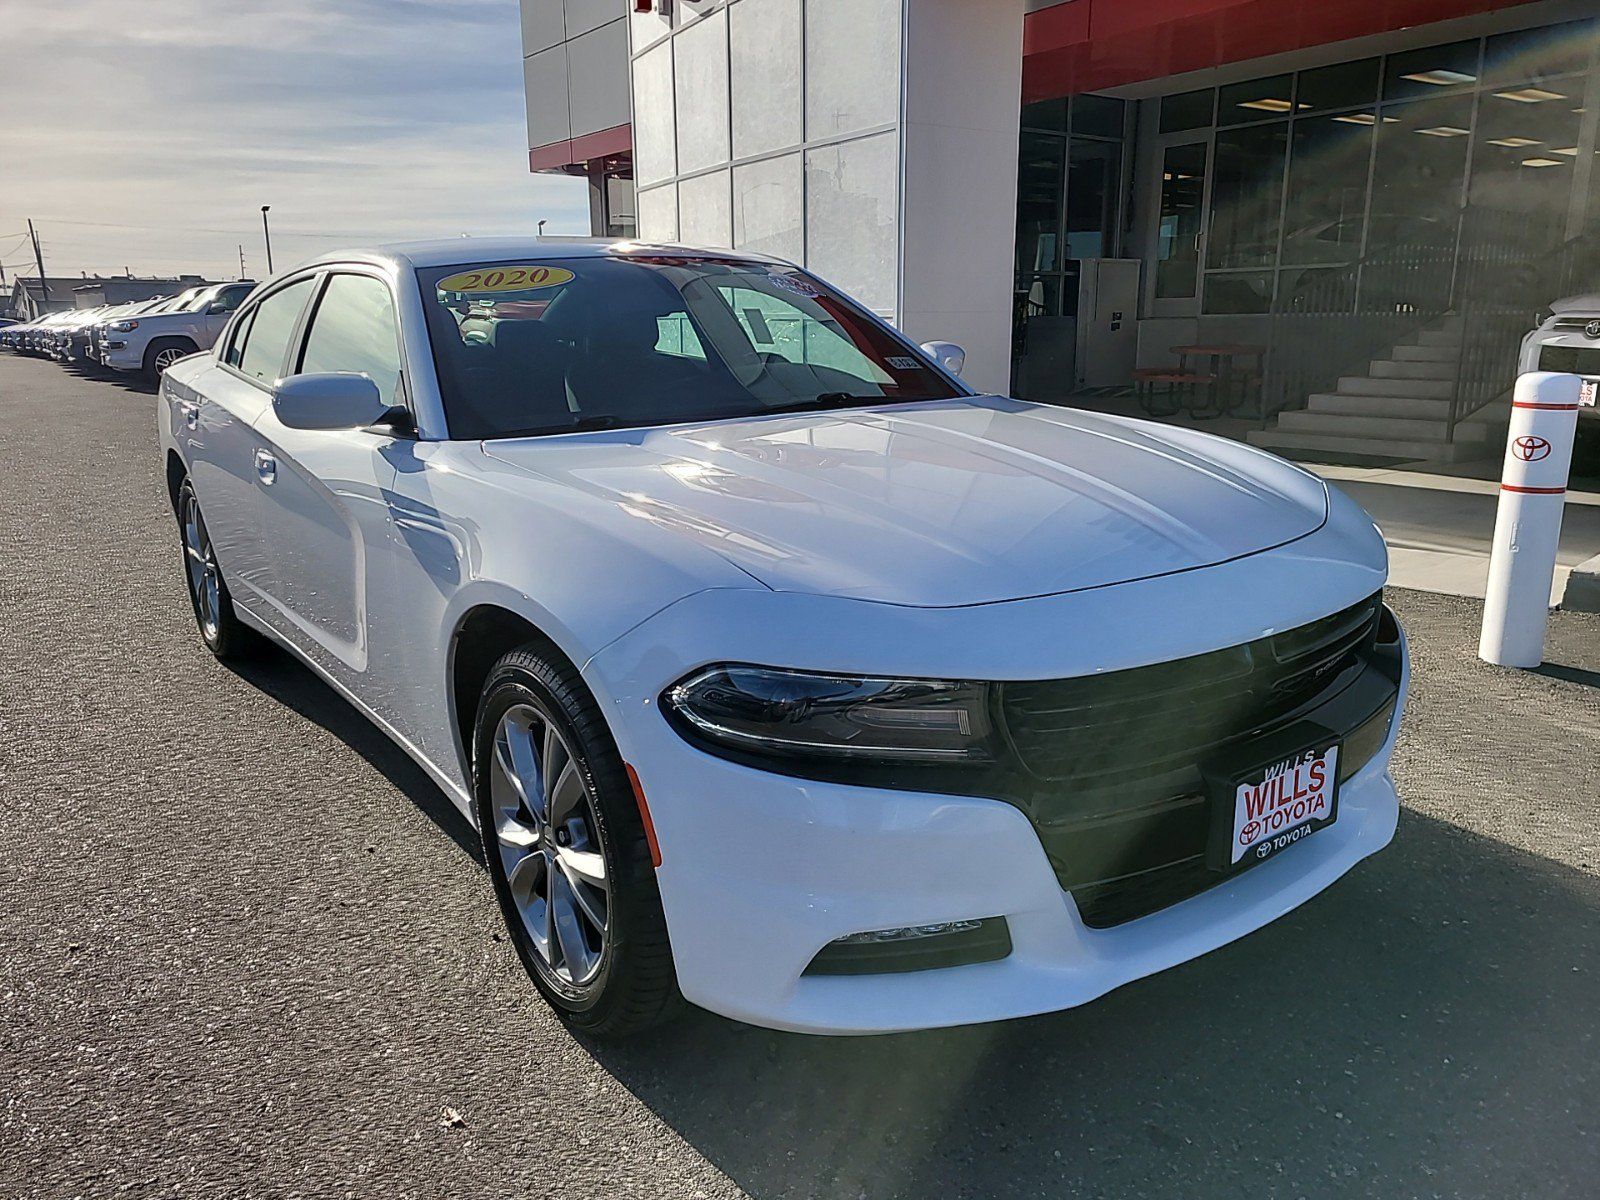 2020 - Dodge - Charger - $24,997